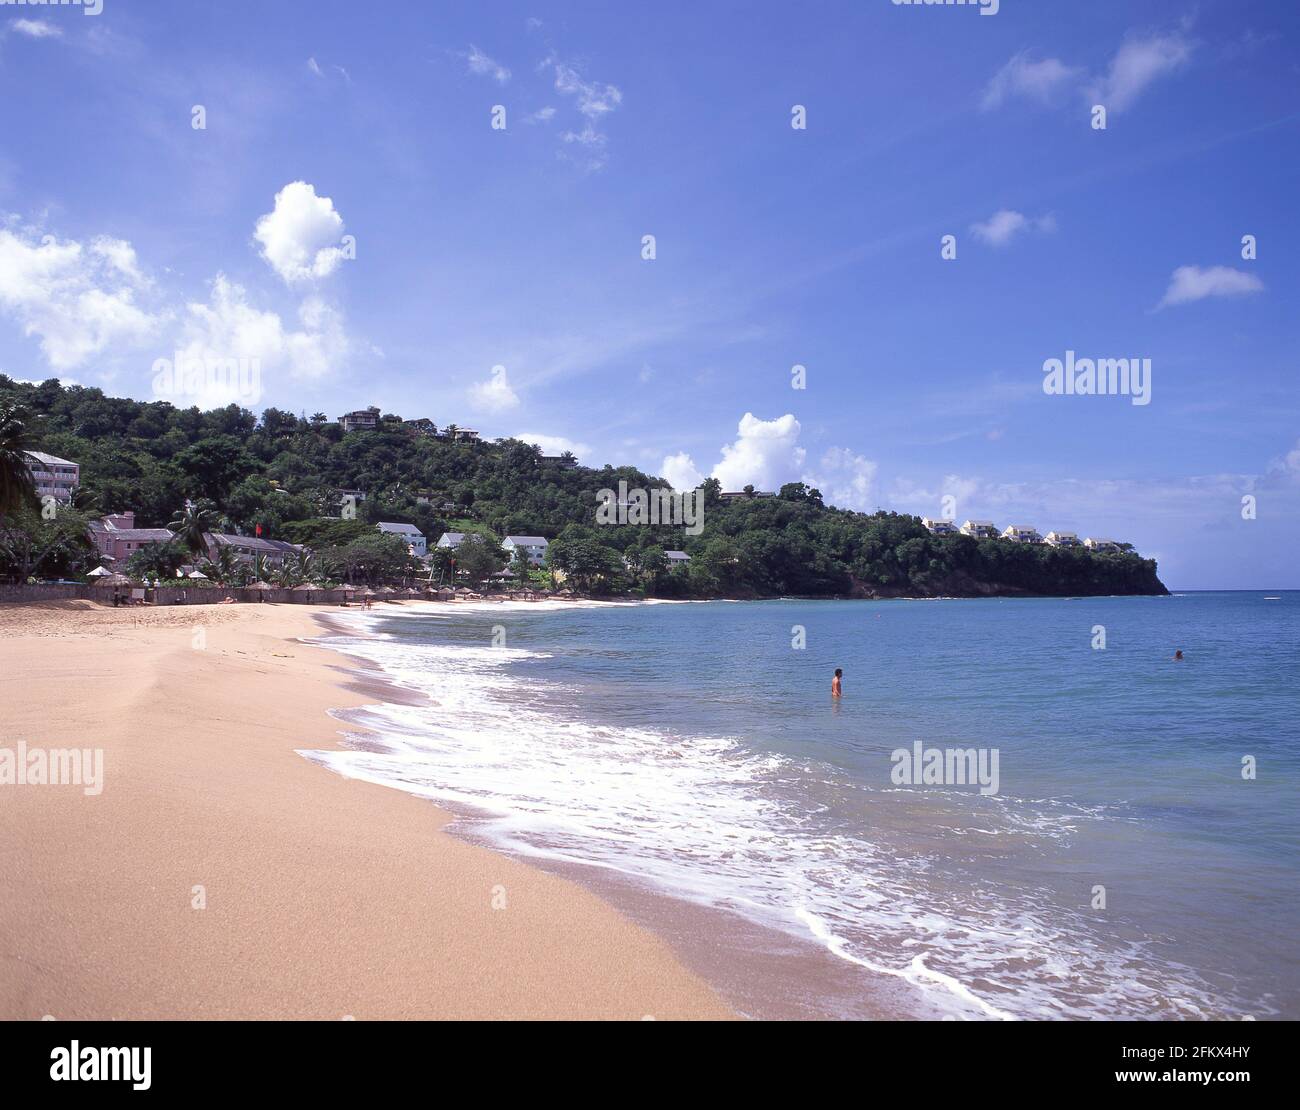 St Kitts And Nevis Beaches High Resolution Stock Photography and Images -  Alamy